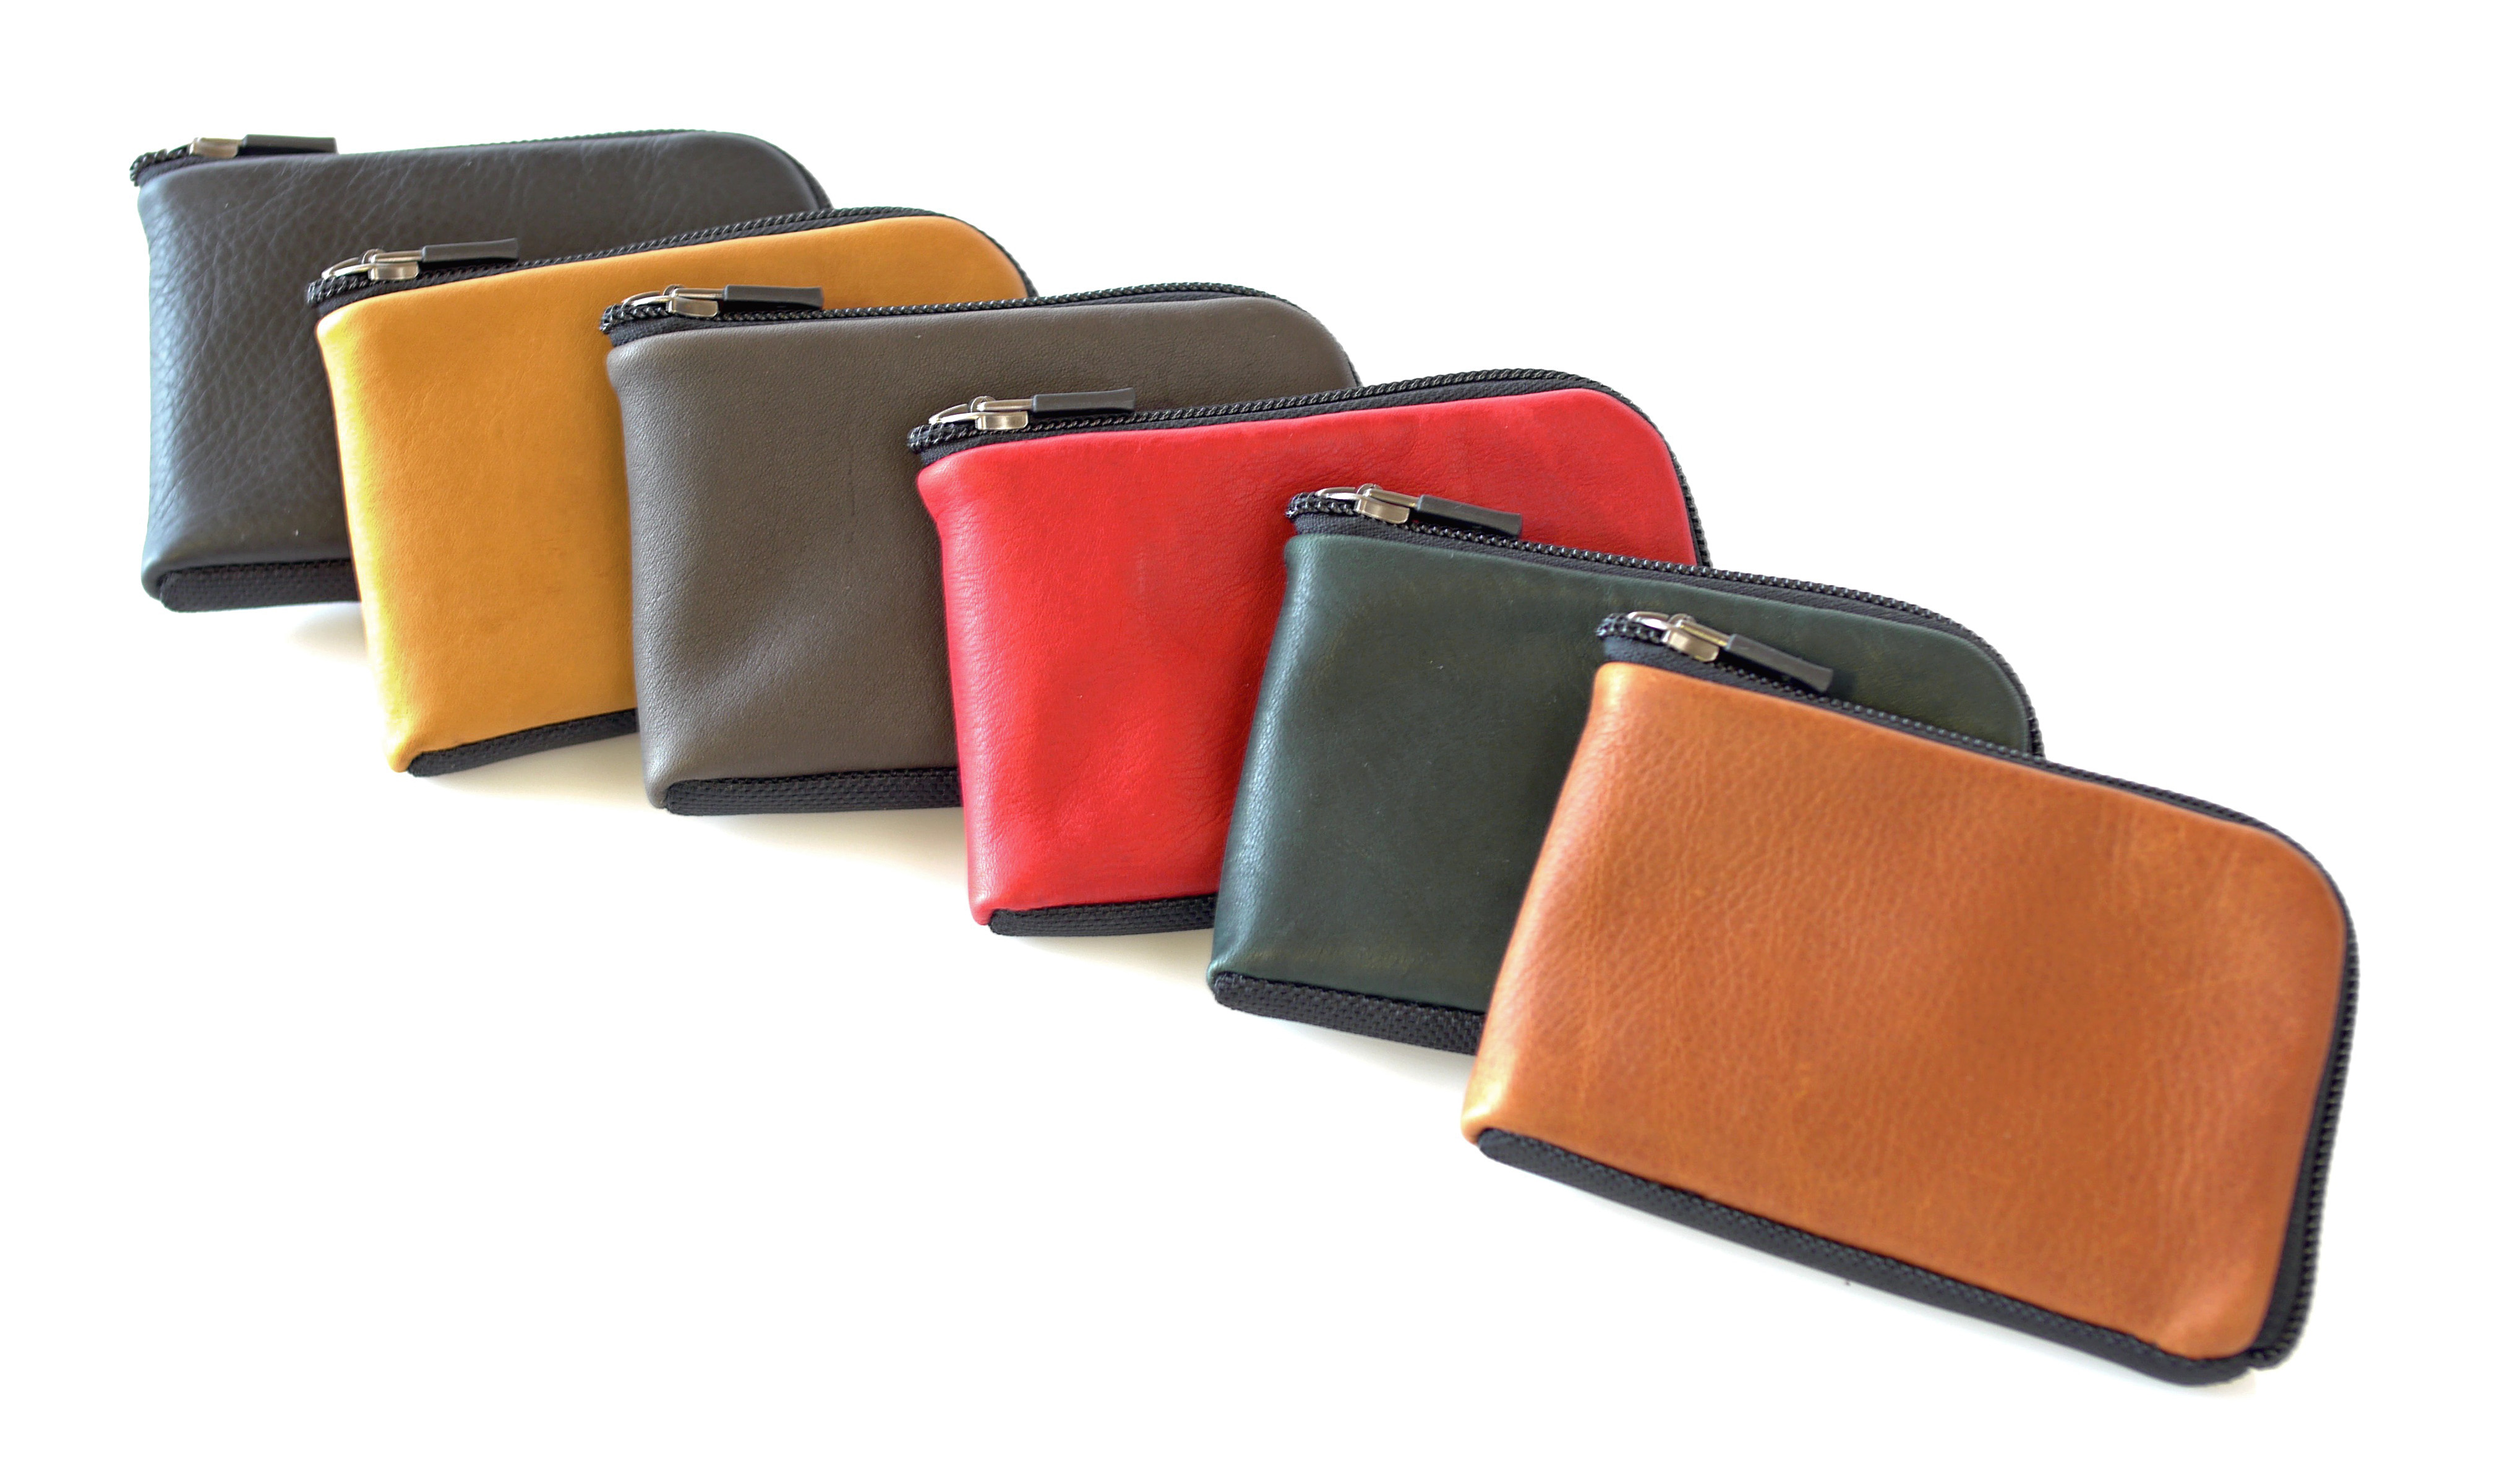 The Finn Leather Wallet